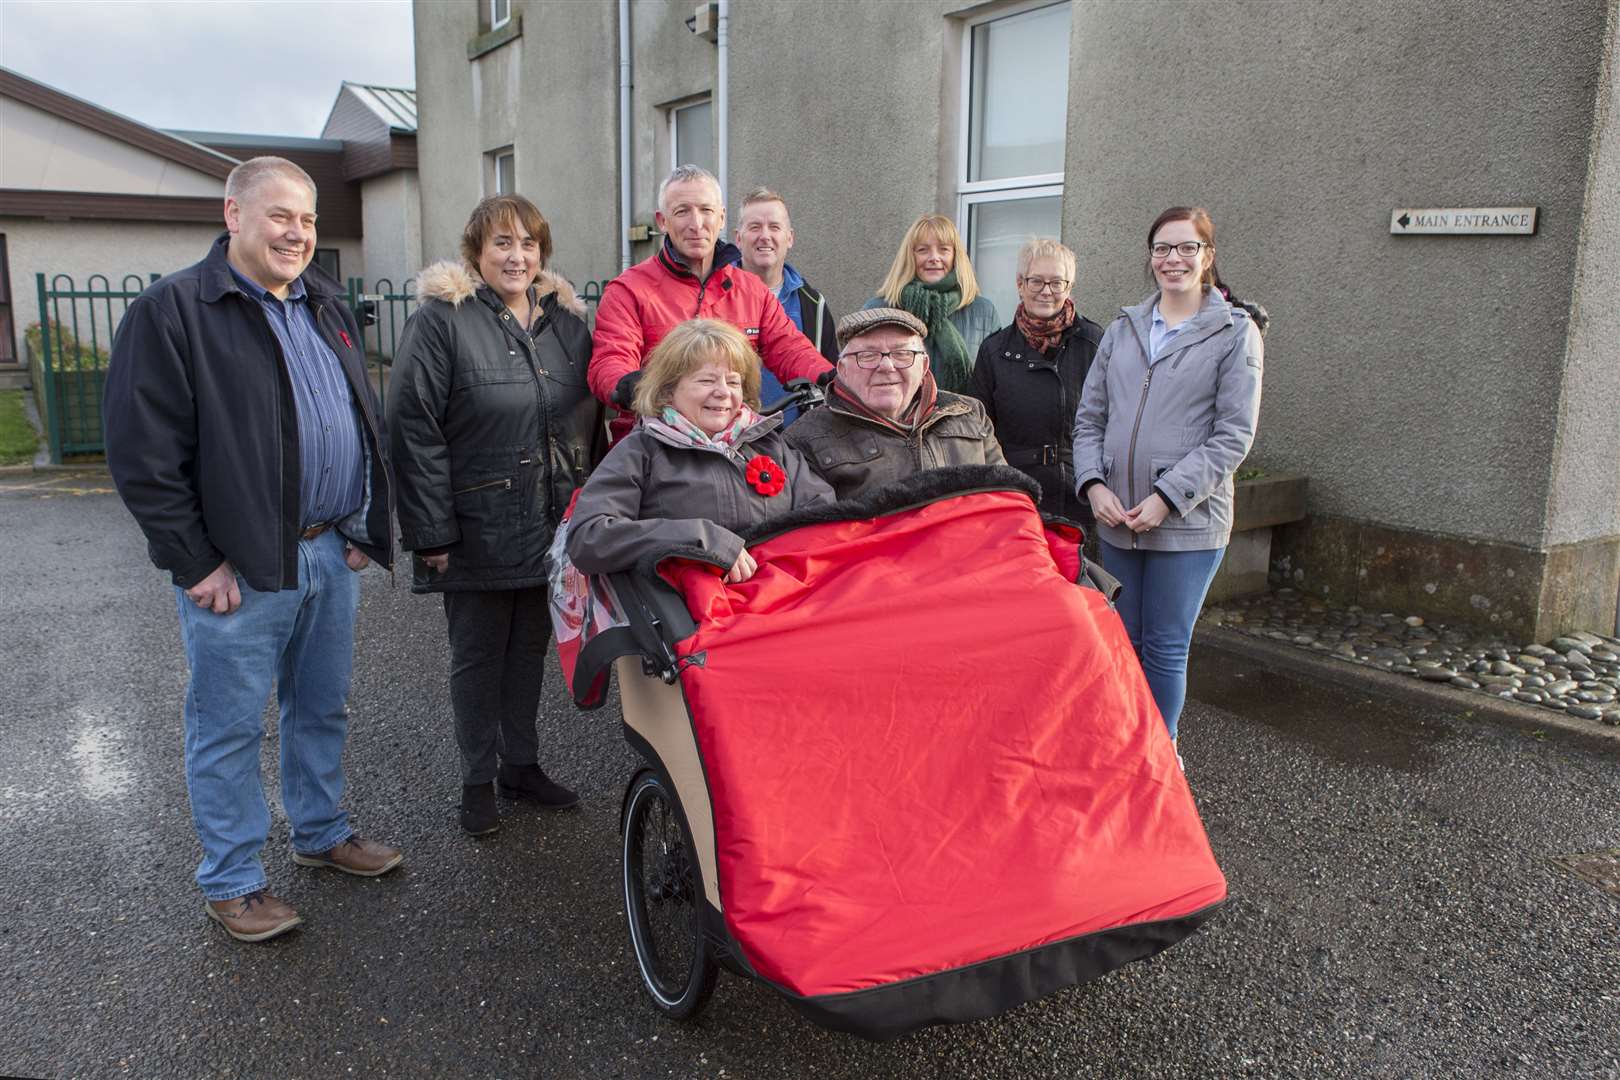 The Triotaxi on its maiden journey from Pulteney House with Iain Sutherland in the passenger seat along with his daughter Helen Hill, with George Ewing in charge of the pedals. Among those looking on are representatives of the groups that helped with the project and some of those who provided funding. From left: Mervyn Hill, Iain's son-in-law; Isobel Campbell, Befriending Caithness; Robert Cormack, Wick Wheelers; Joanna Coghill, Royal Burgh of Wick Community Council; Yvonne Hendry, Caithness Voluntary Group; and Kayleigh Sinclair (George's daughter), Befriending Caithness. Picture: Robert MacDonald / Northern Studios